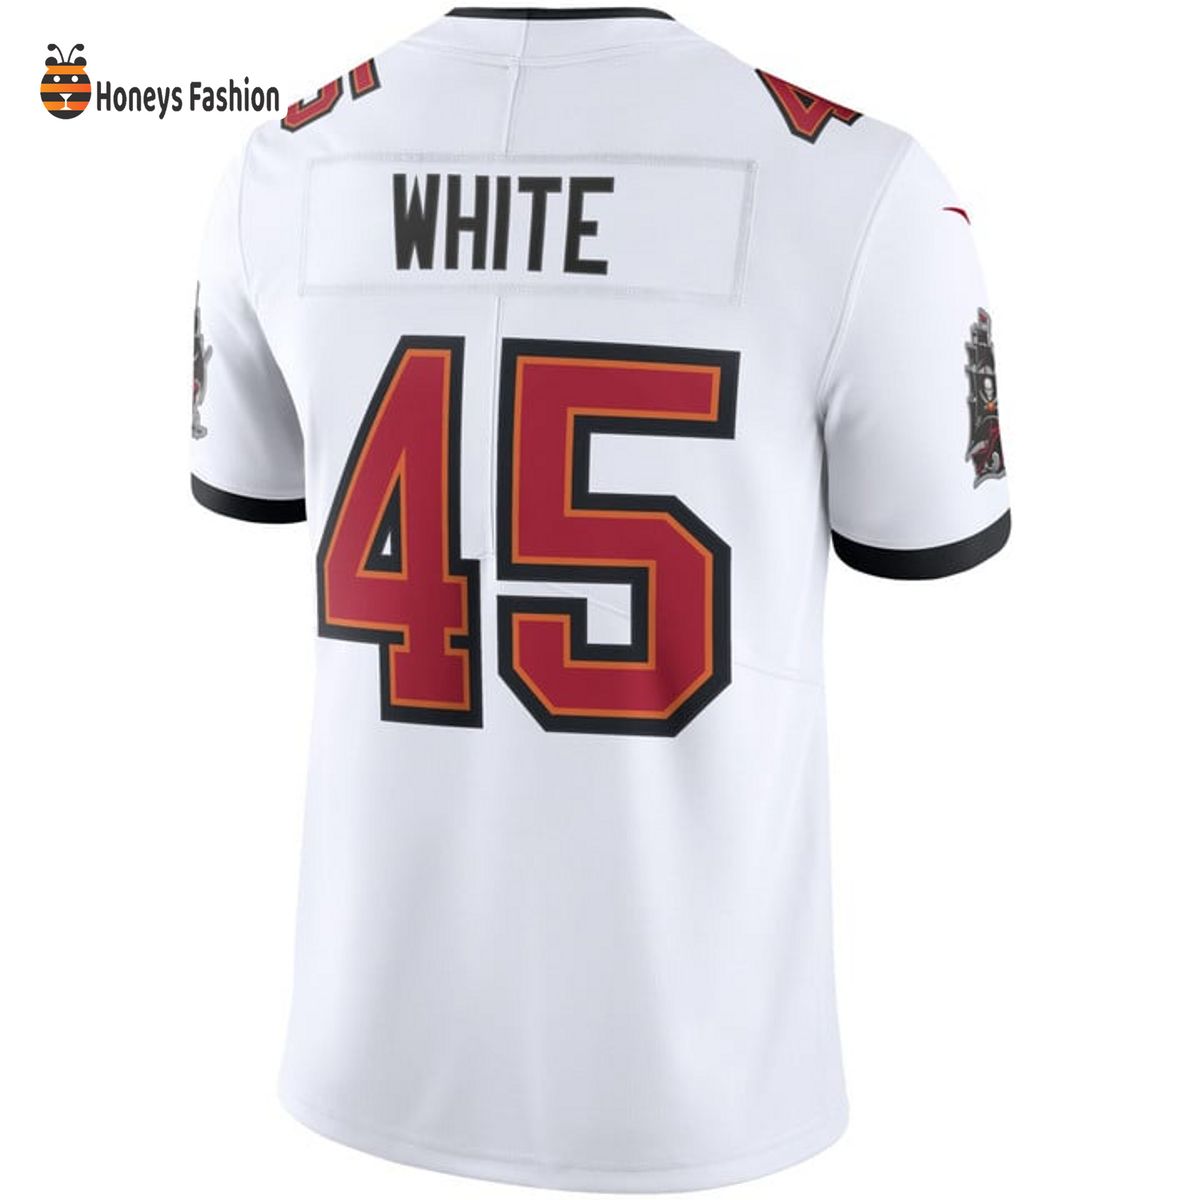 Devin White Tampa Bay Buccaneers Nike Vapor White Limited Jersey